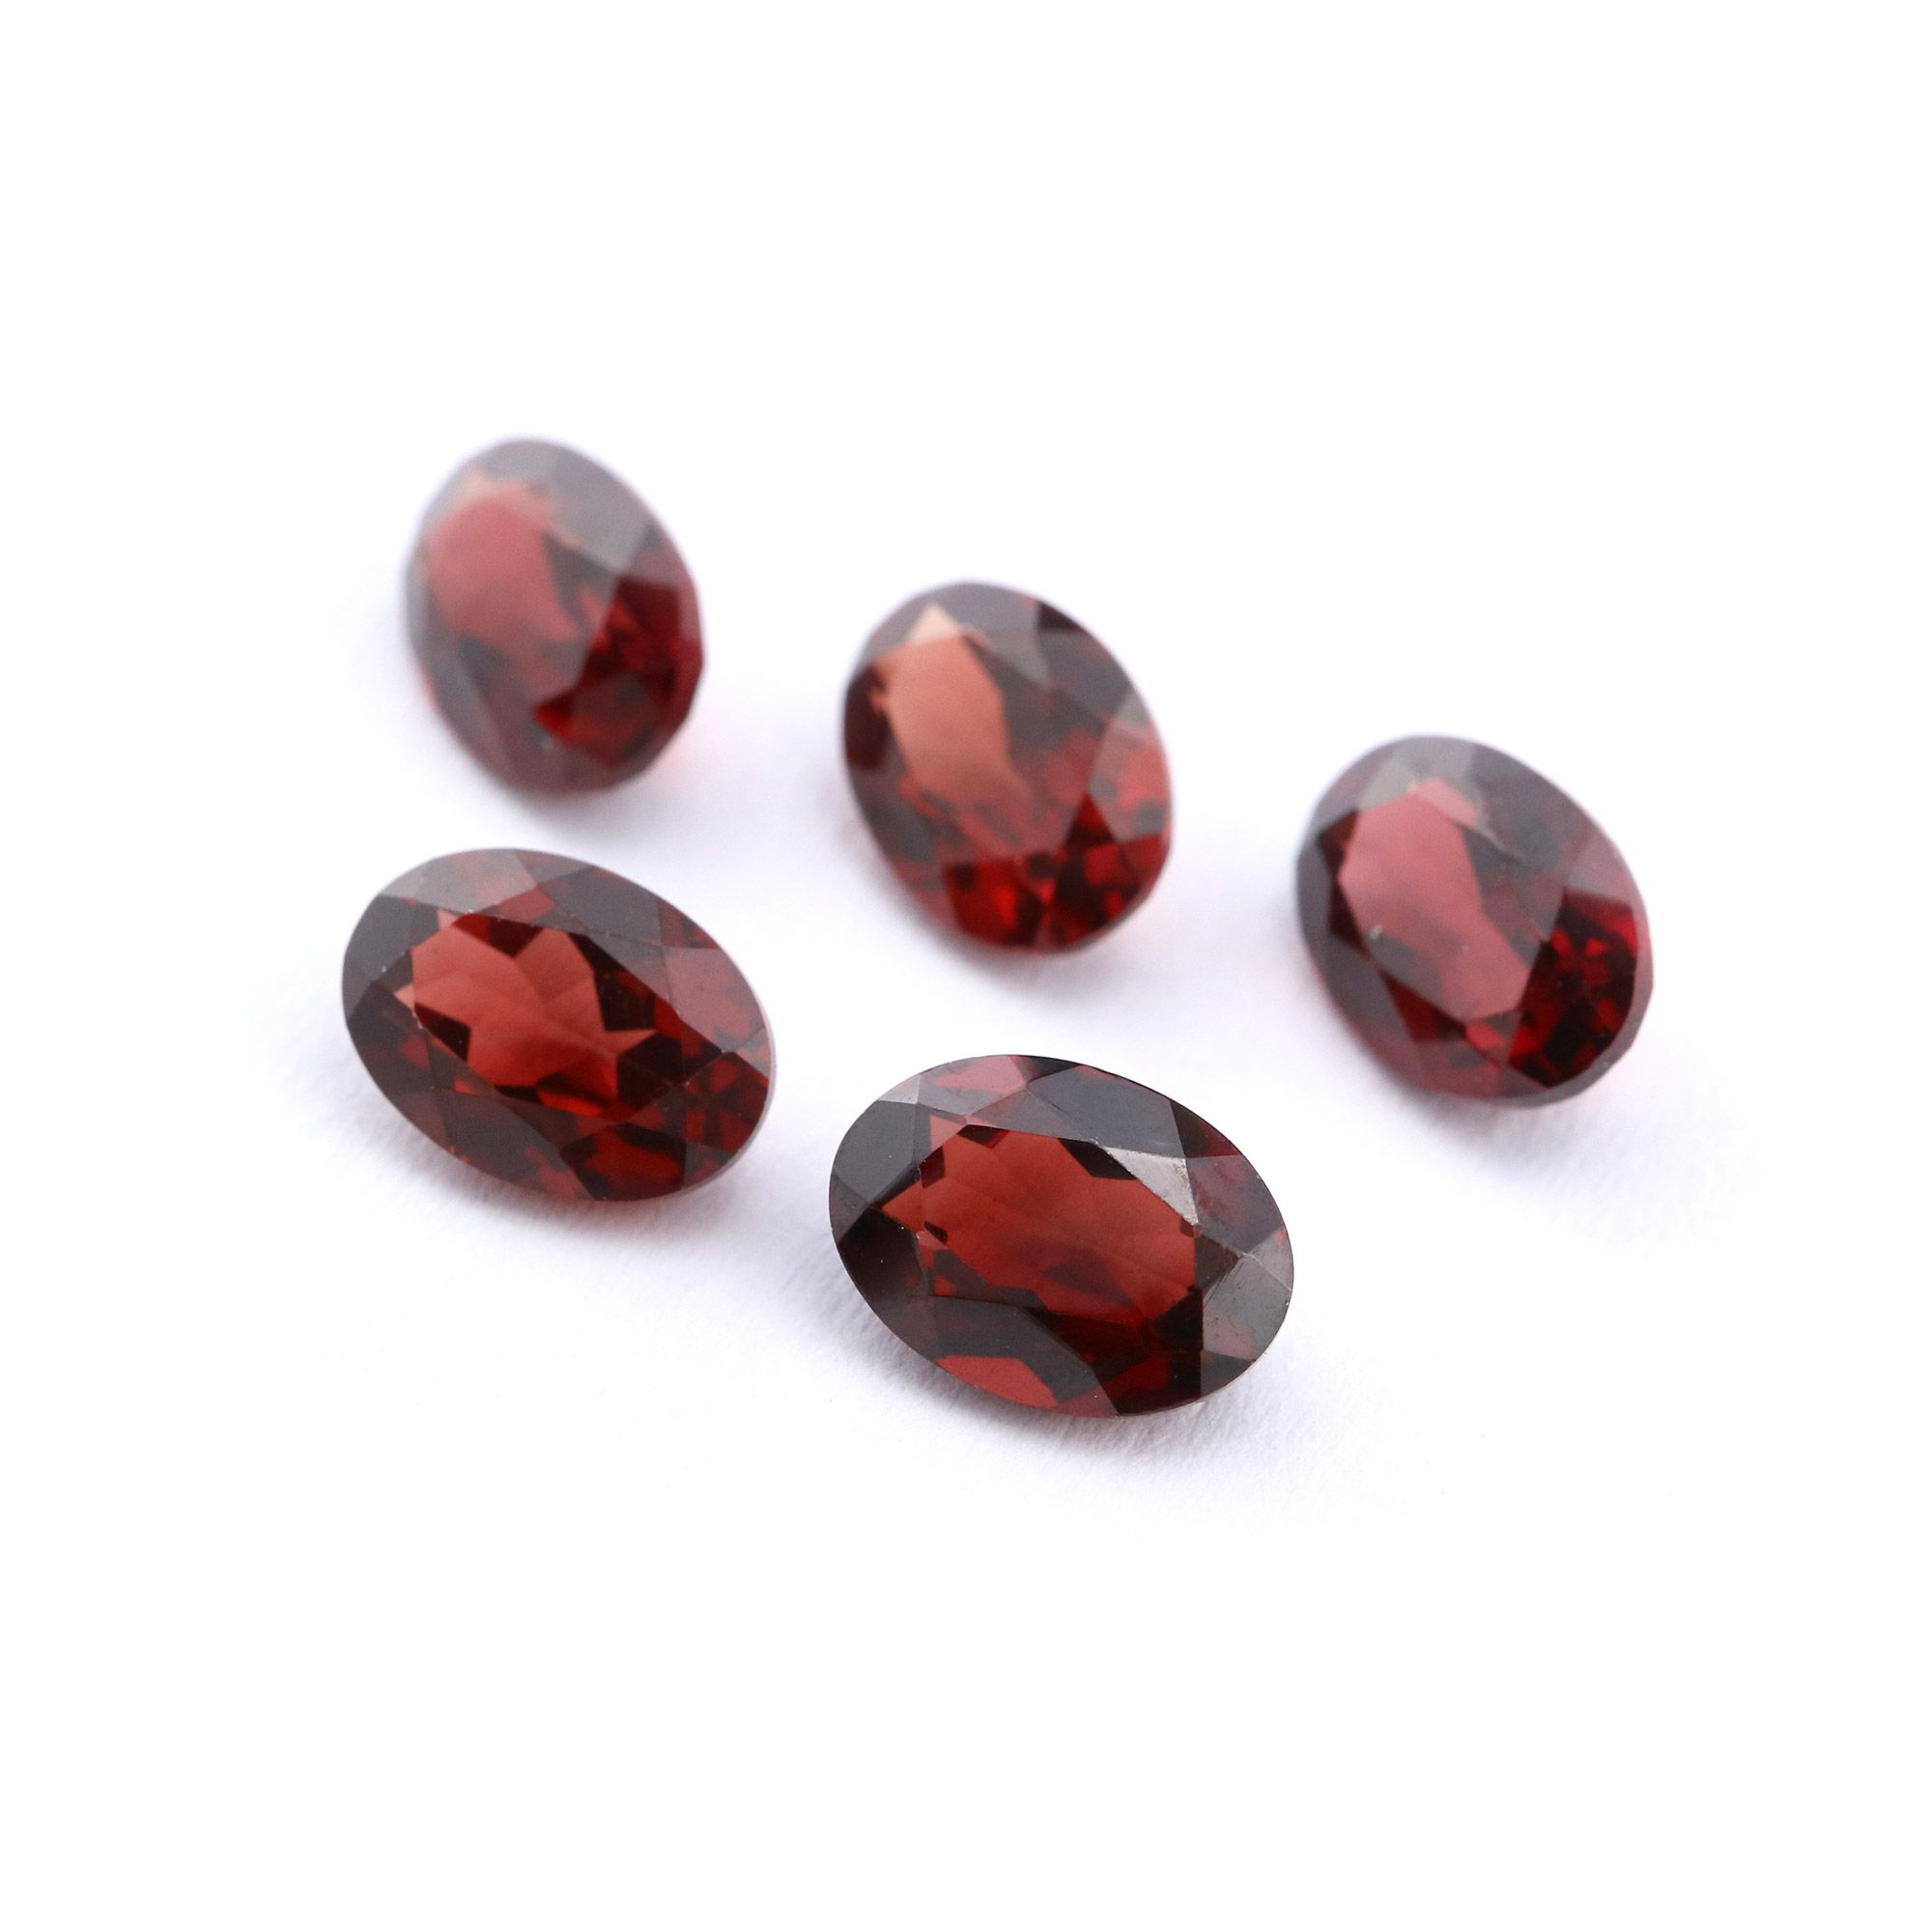 5Pcs Oval Red Garnet January Birthstone Faceted Cut Loose Gemstone Natural Semi Precious Stone DIY Jewelry Supplies 4120124 - Click Image to Close